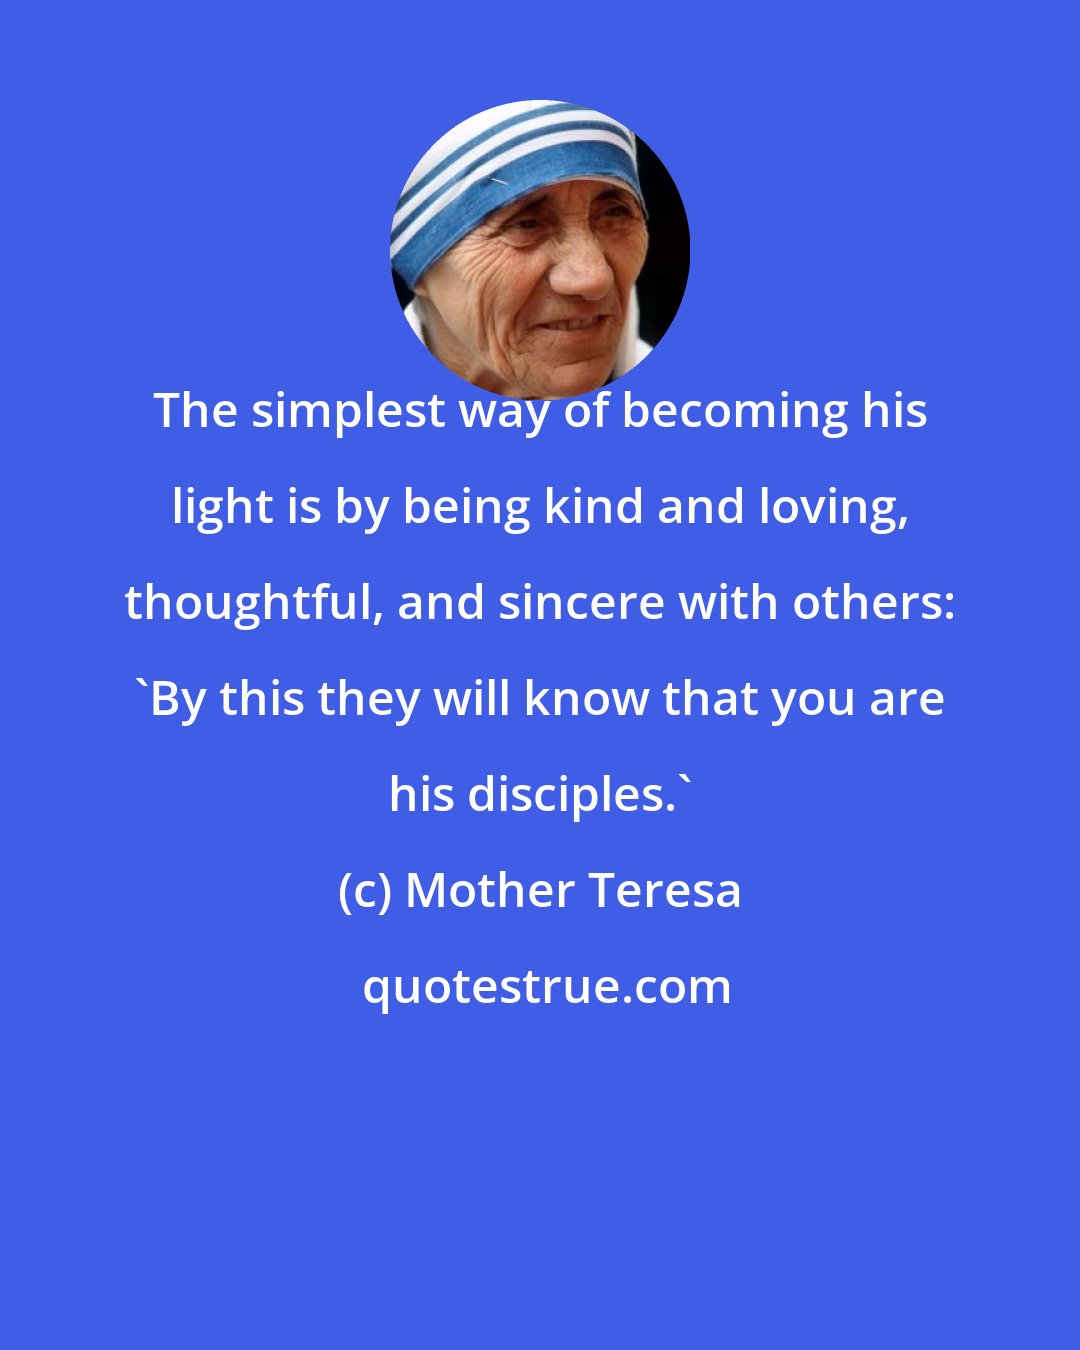 Mother Teresa: The simplest way of becoming his light is by being kind and loving, thoughtful, and sincere with others: 'By this they will know that you are his disciples.'